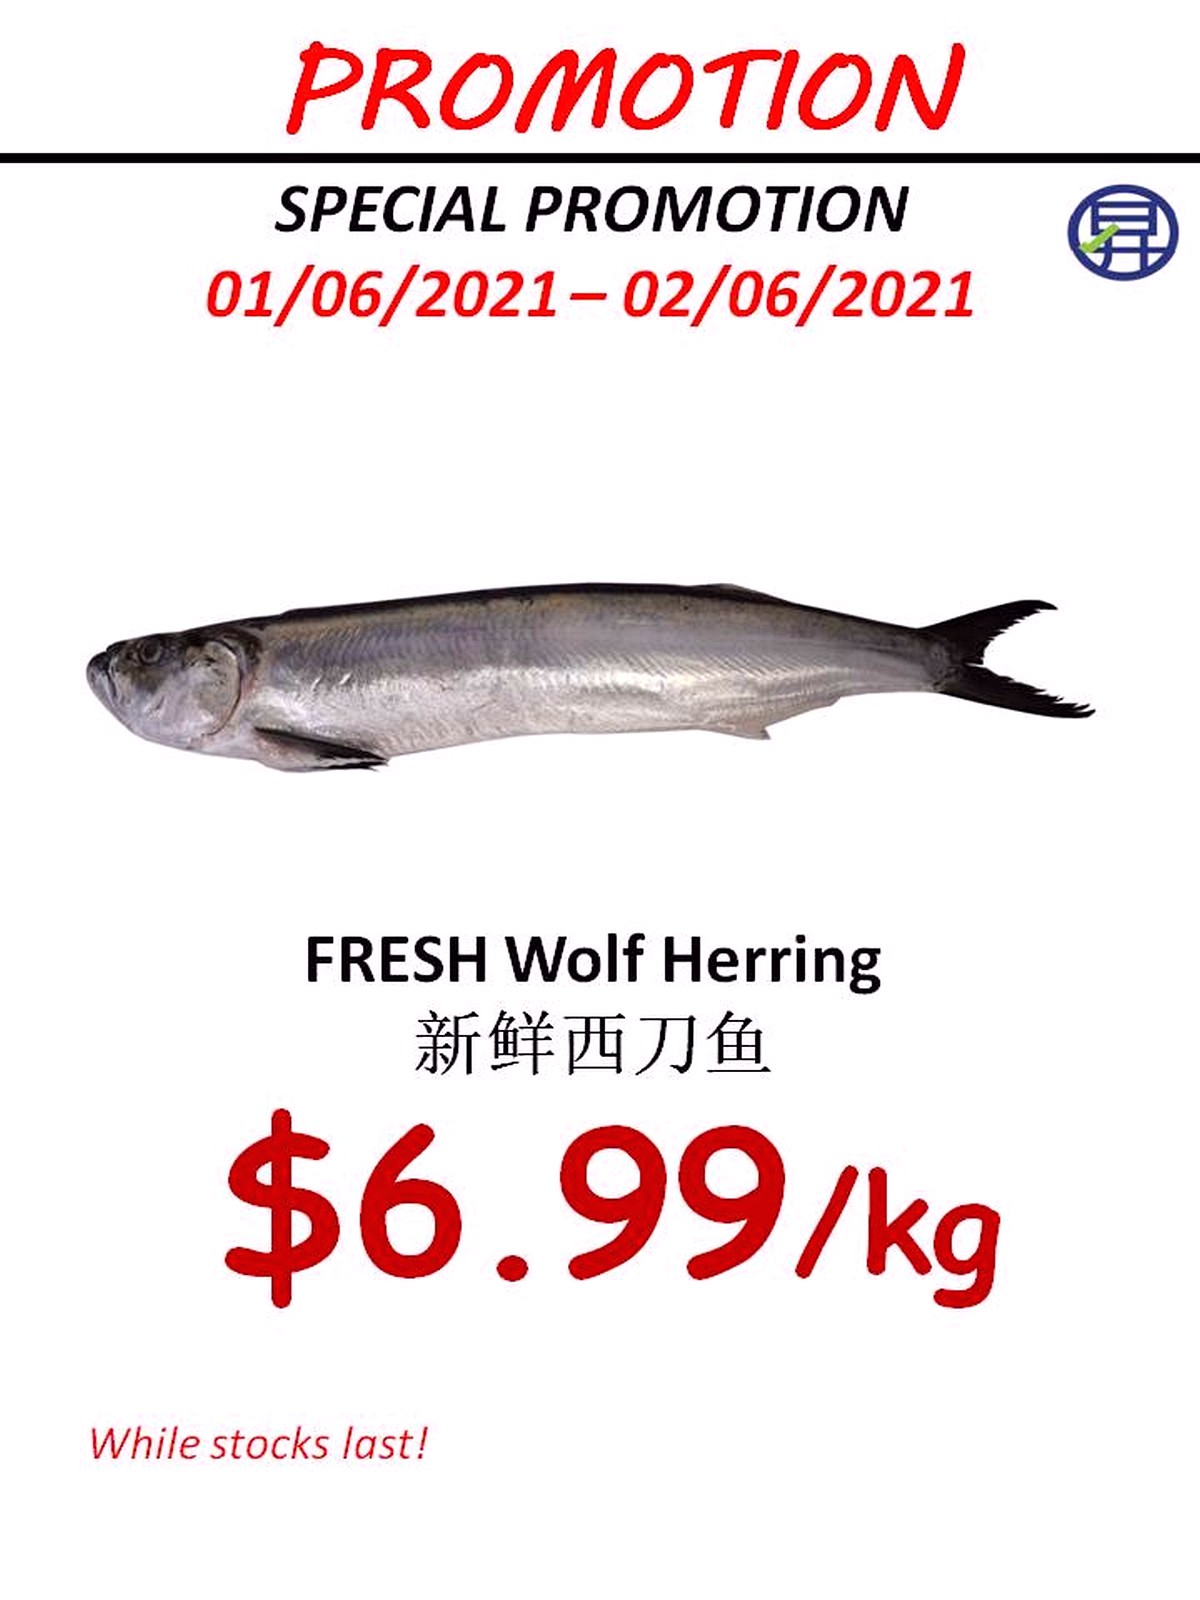 Sheng-Siong-Today-Fresh-Fish-Seafood-Promotion-2021-Singapore-004 Now till 17 Jun  2021: Sheng Siong Mega Promotion! 2 Fresh Seabass for $9.88 only